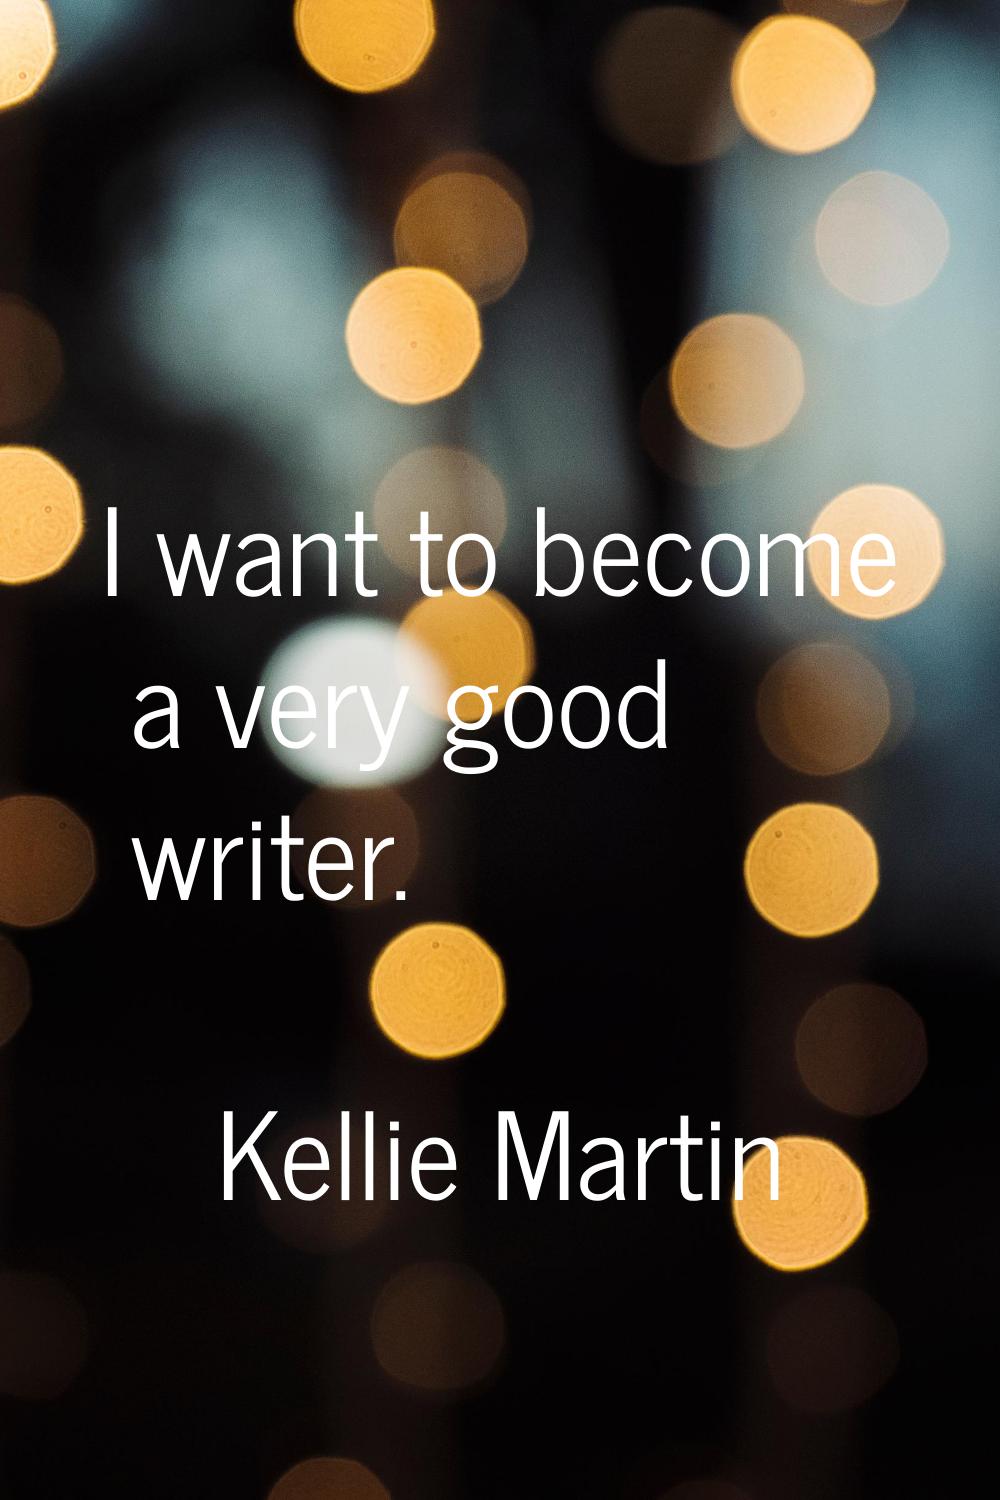 I want to become a very good writer.